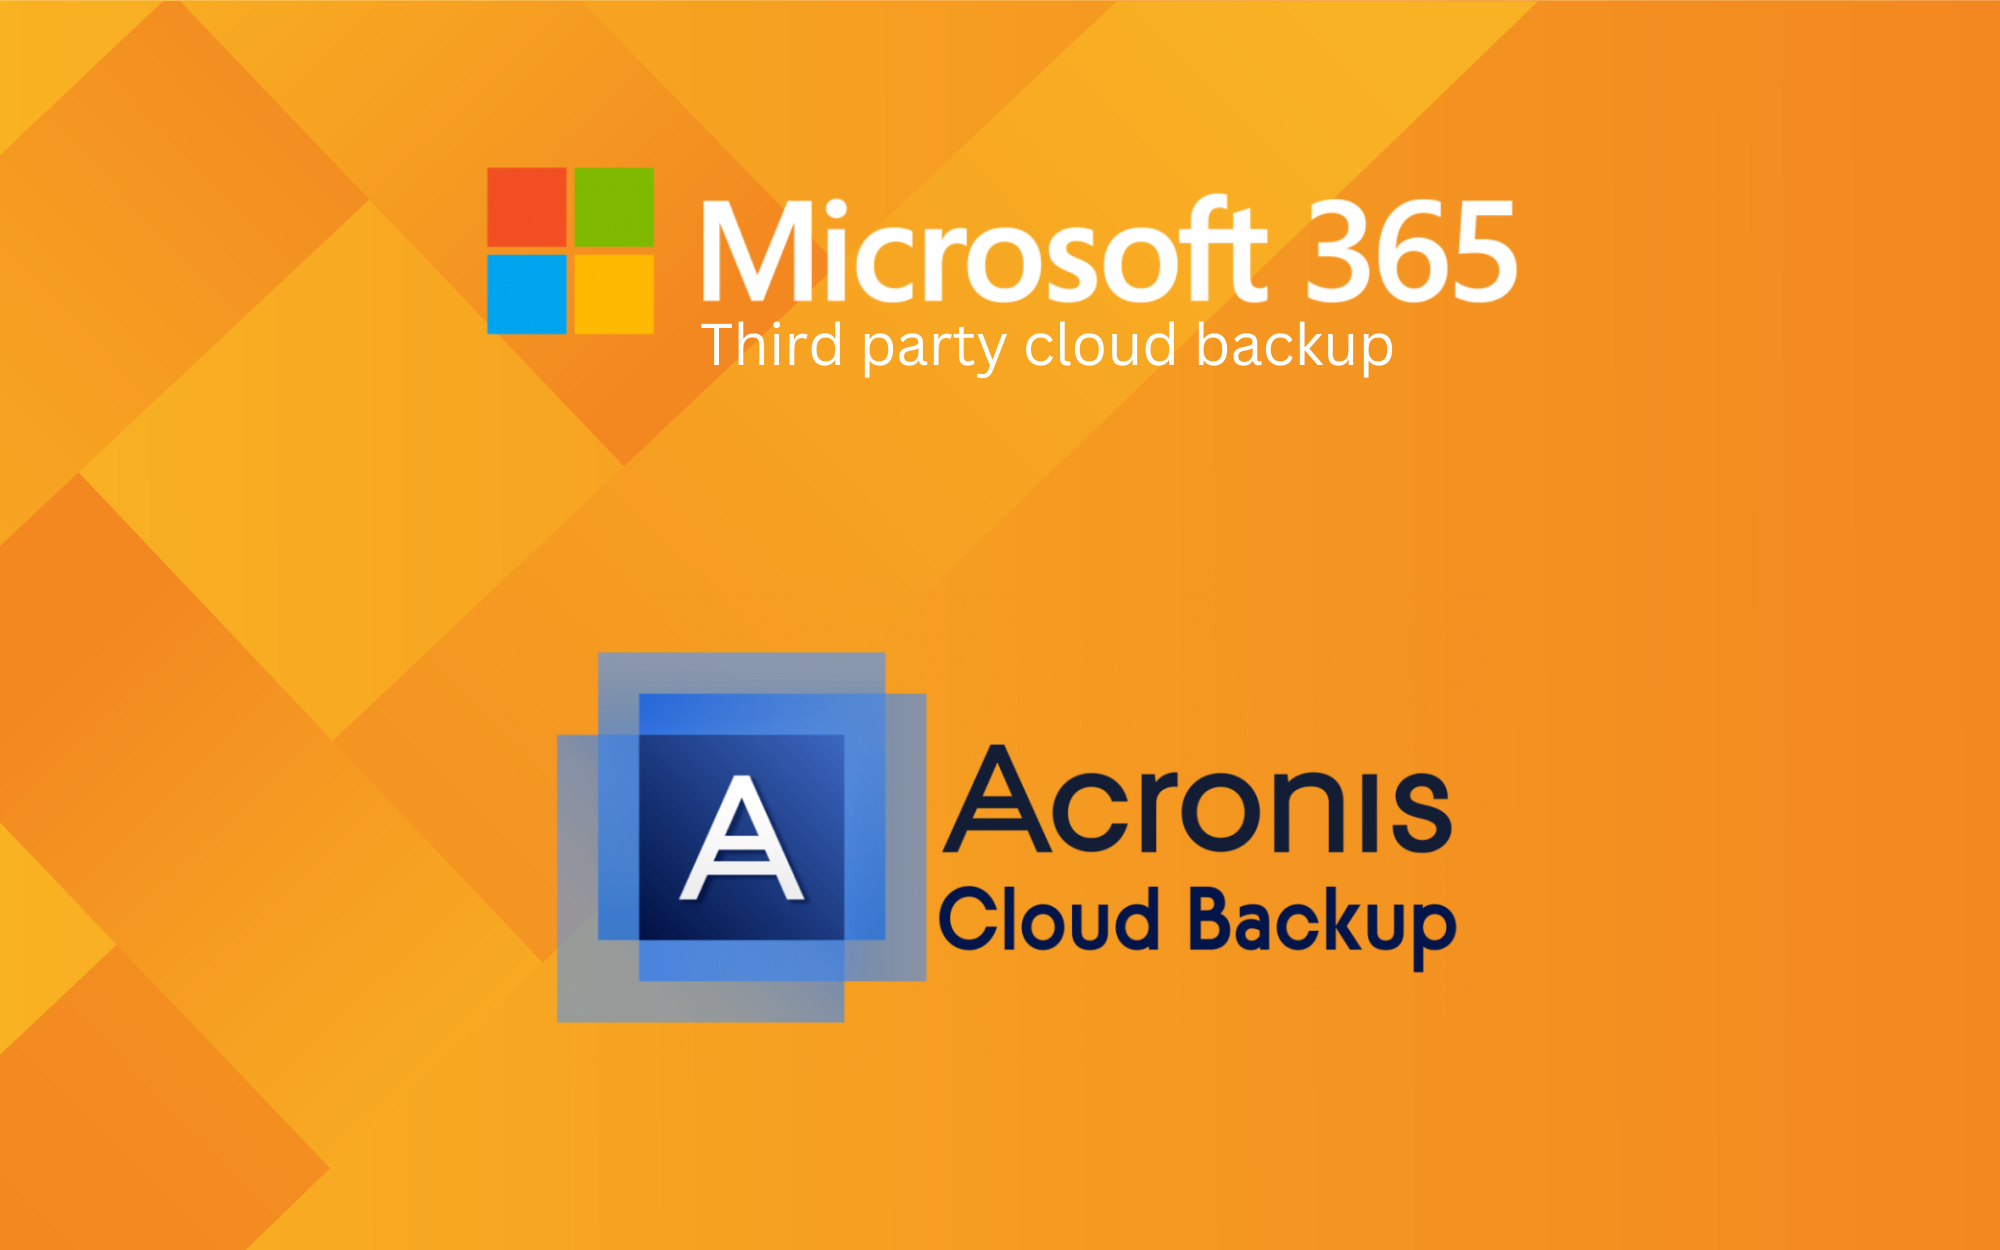 The Benefits of Acronis Backup for Securing Your Microsoft Environment